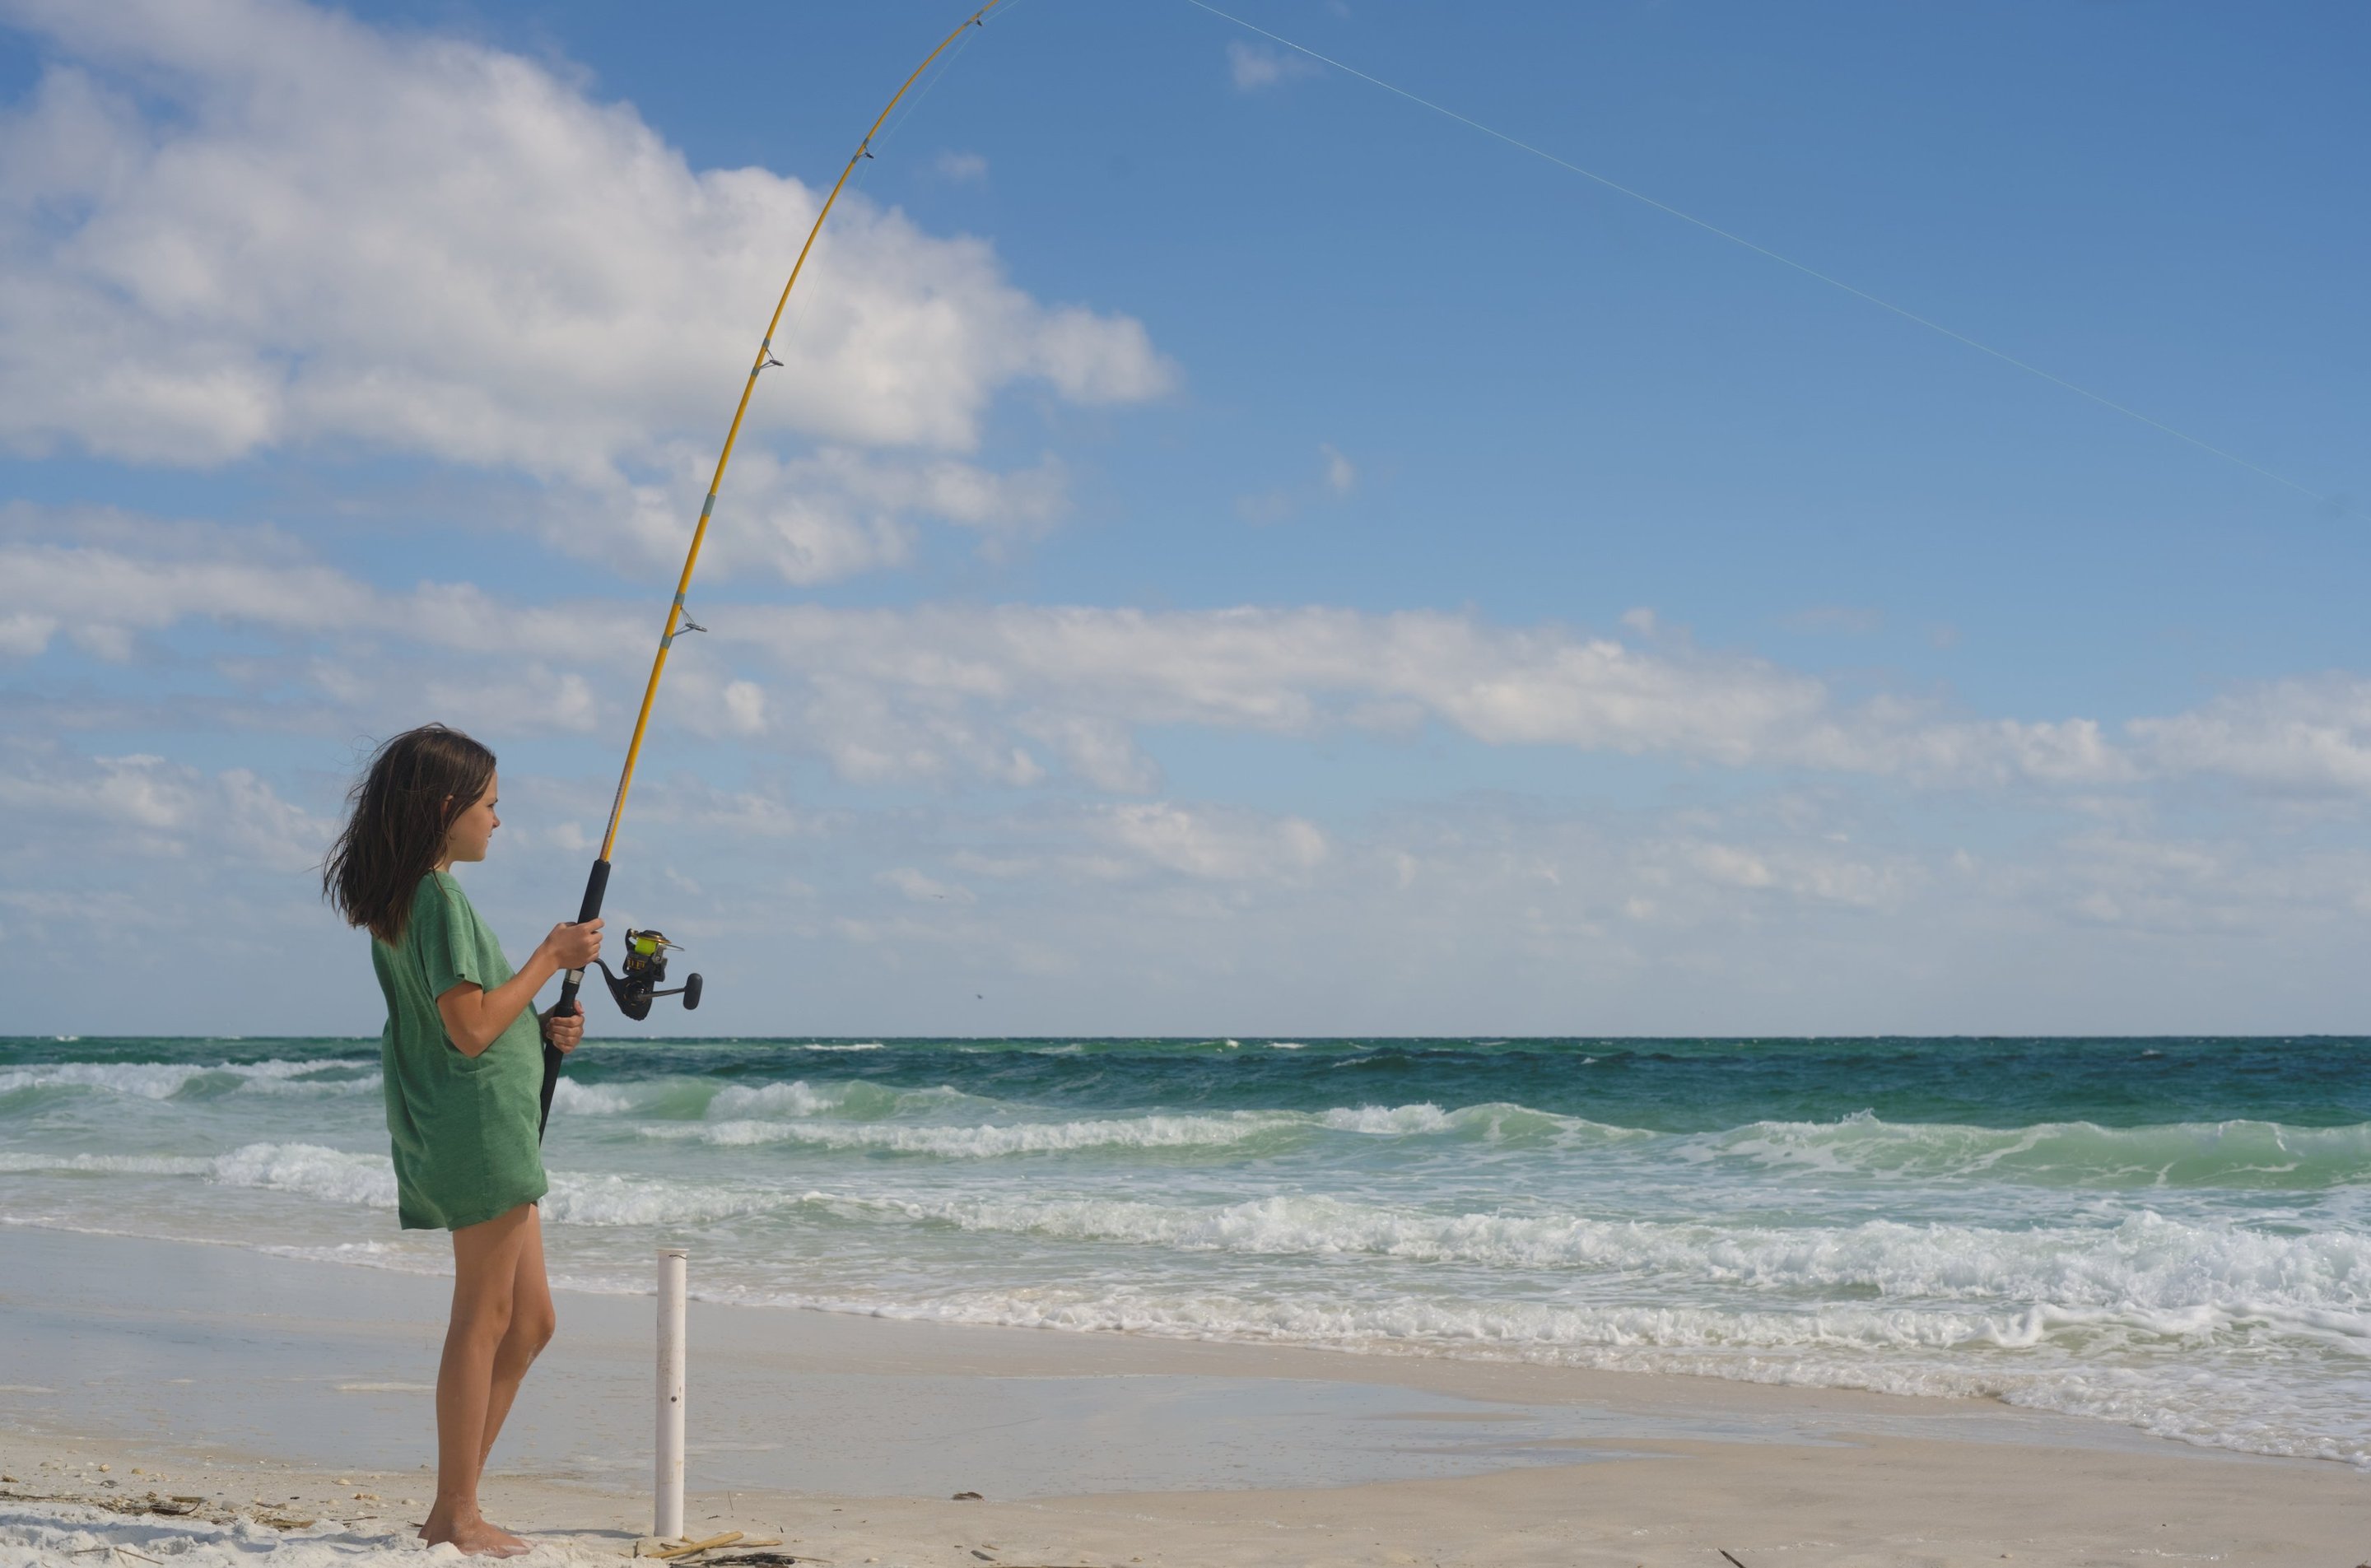 lilah surf fishing at fort pickens photographed by luxagraf